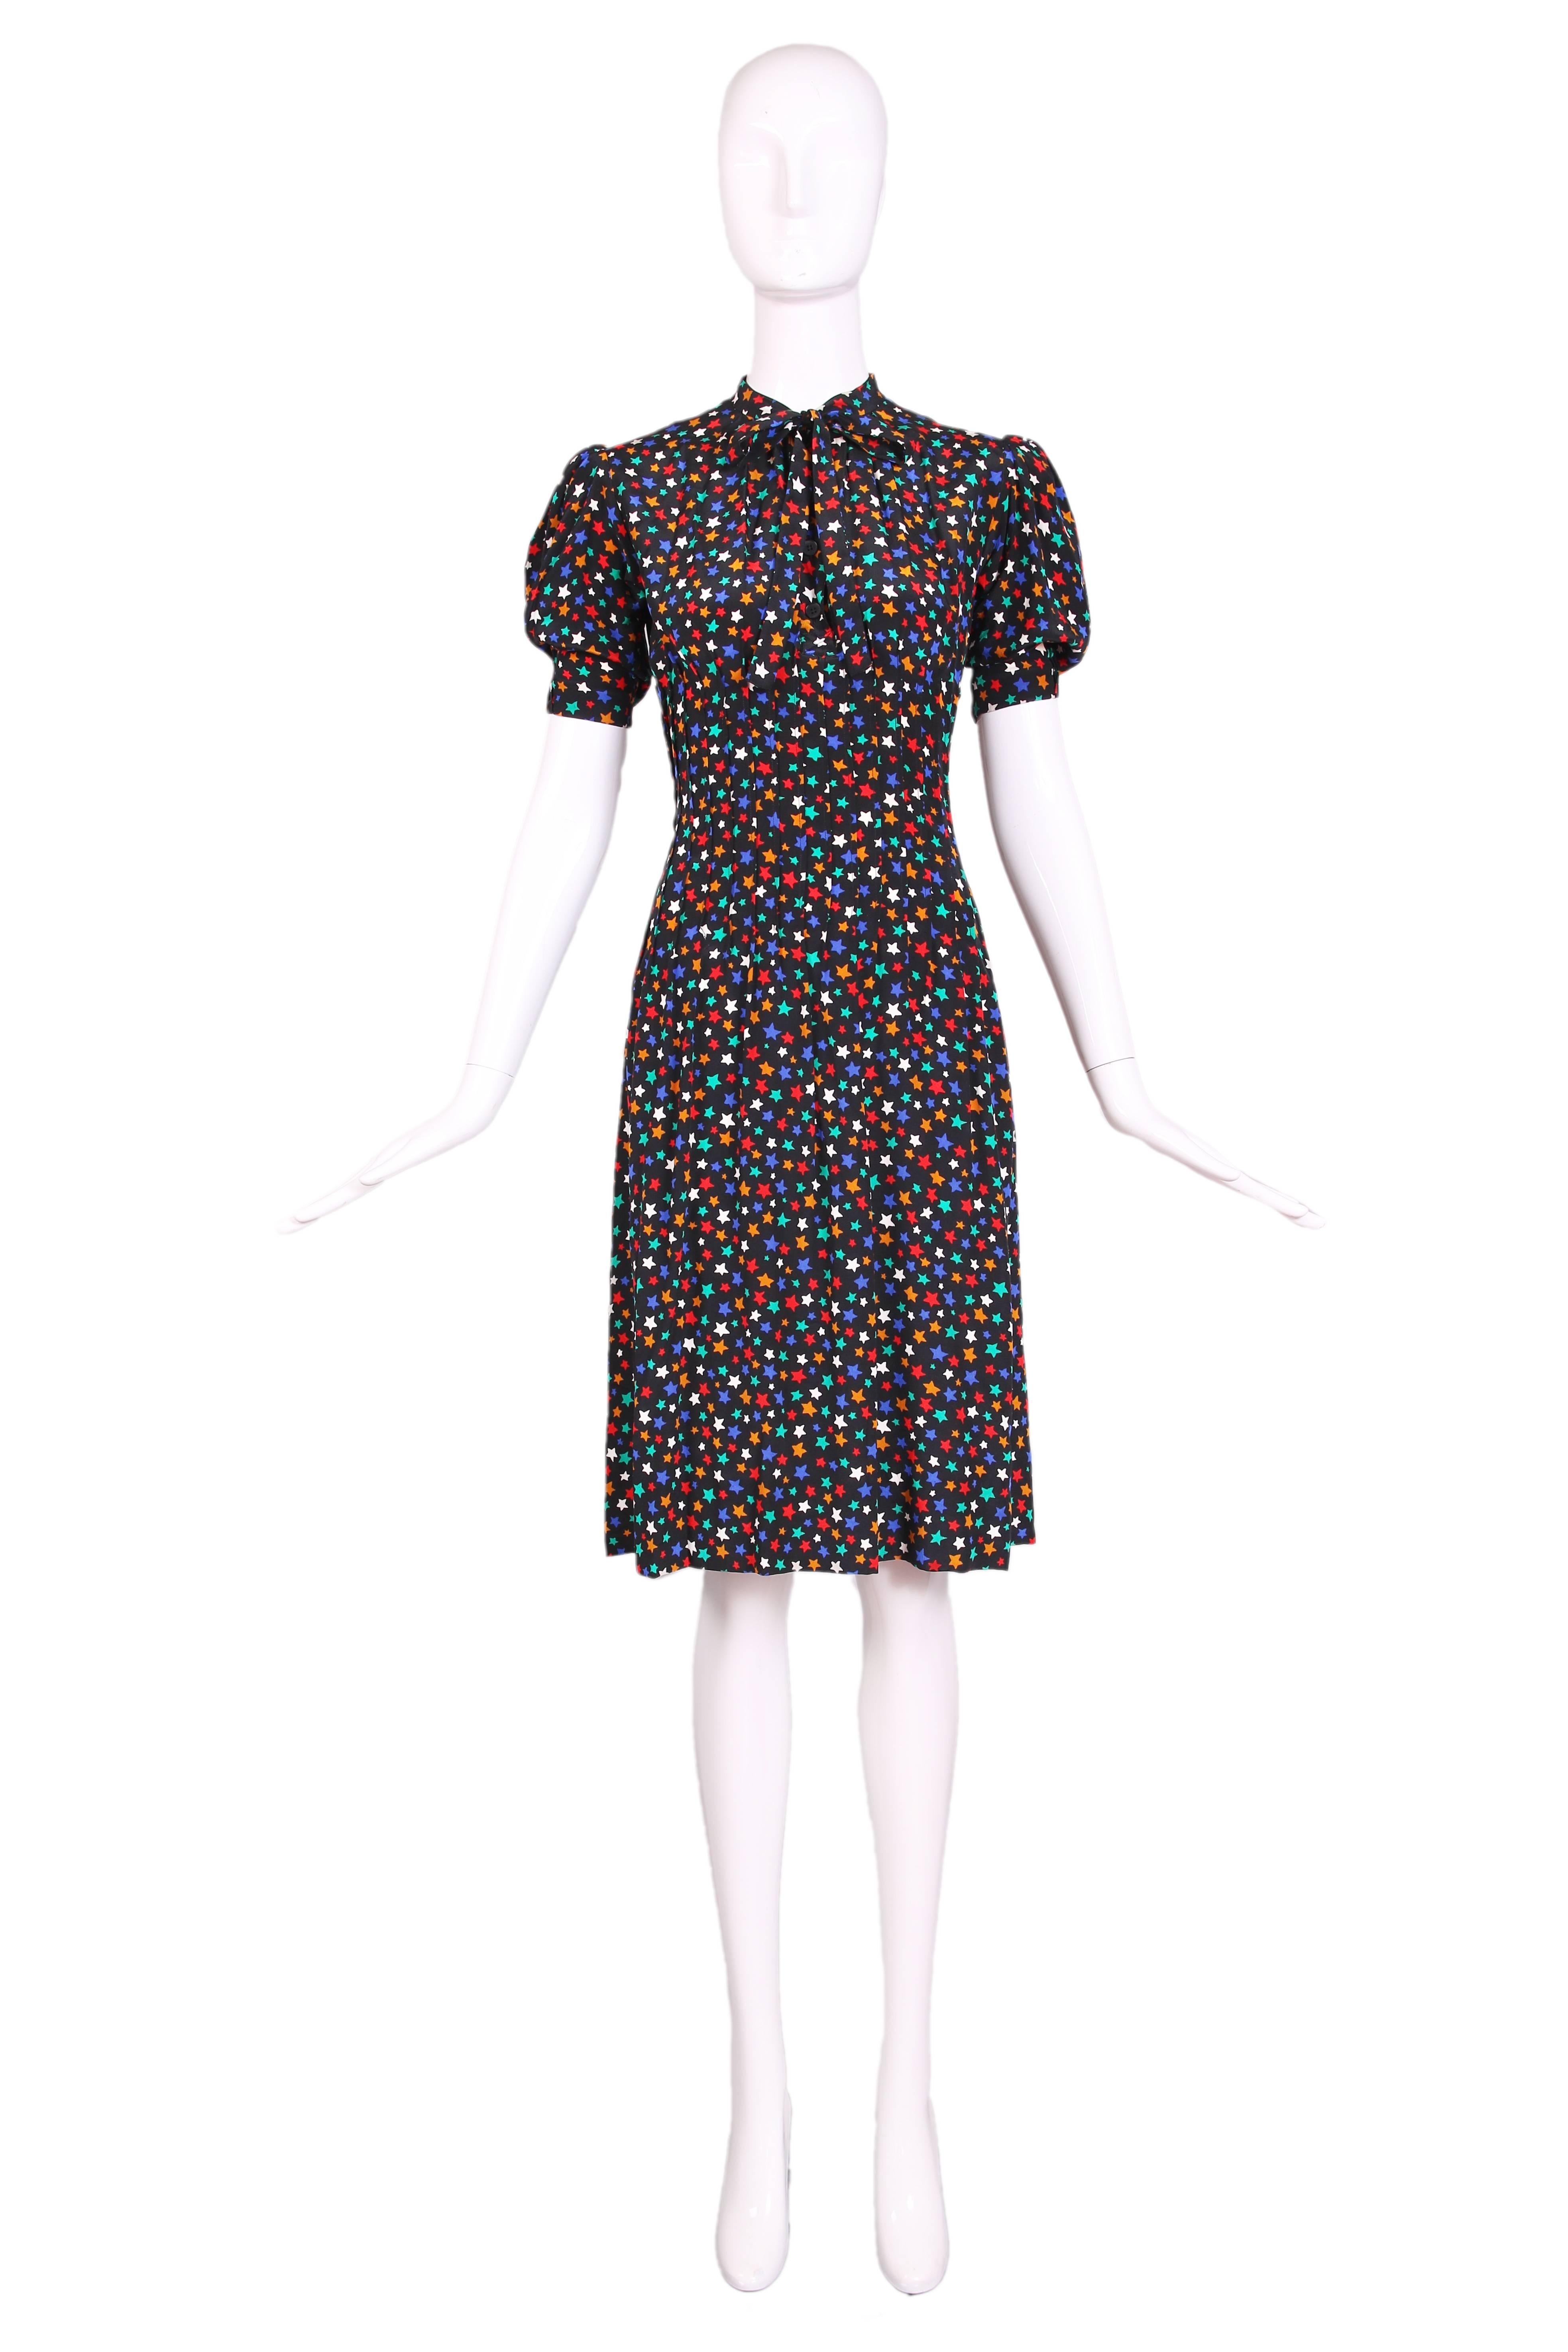 Vintage Yves Saint Laurent black silk day dress with a star print in white, red, orange, blue, and teal with neck ties, puffed short sleeves, and button front placket. The dress features pin tucking around waist area which turns into pleating at the